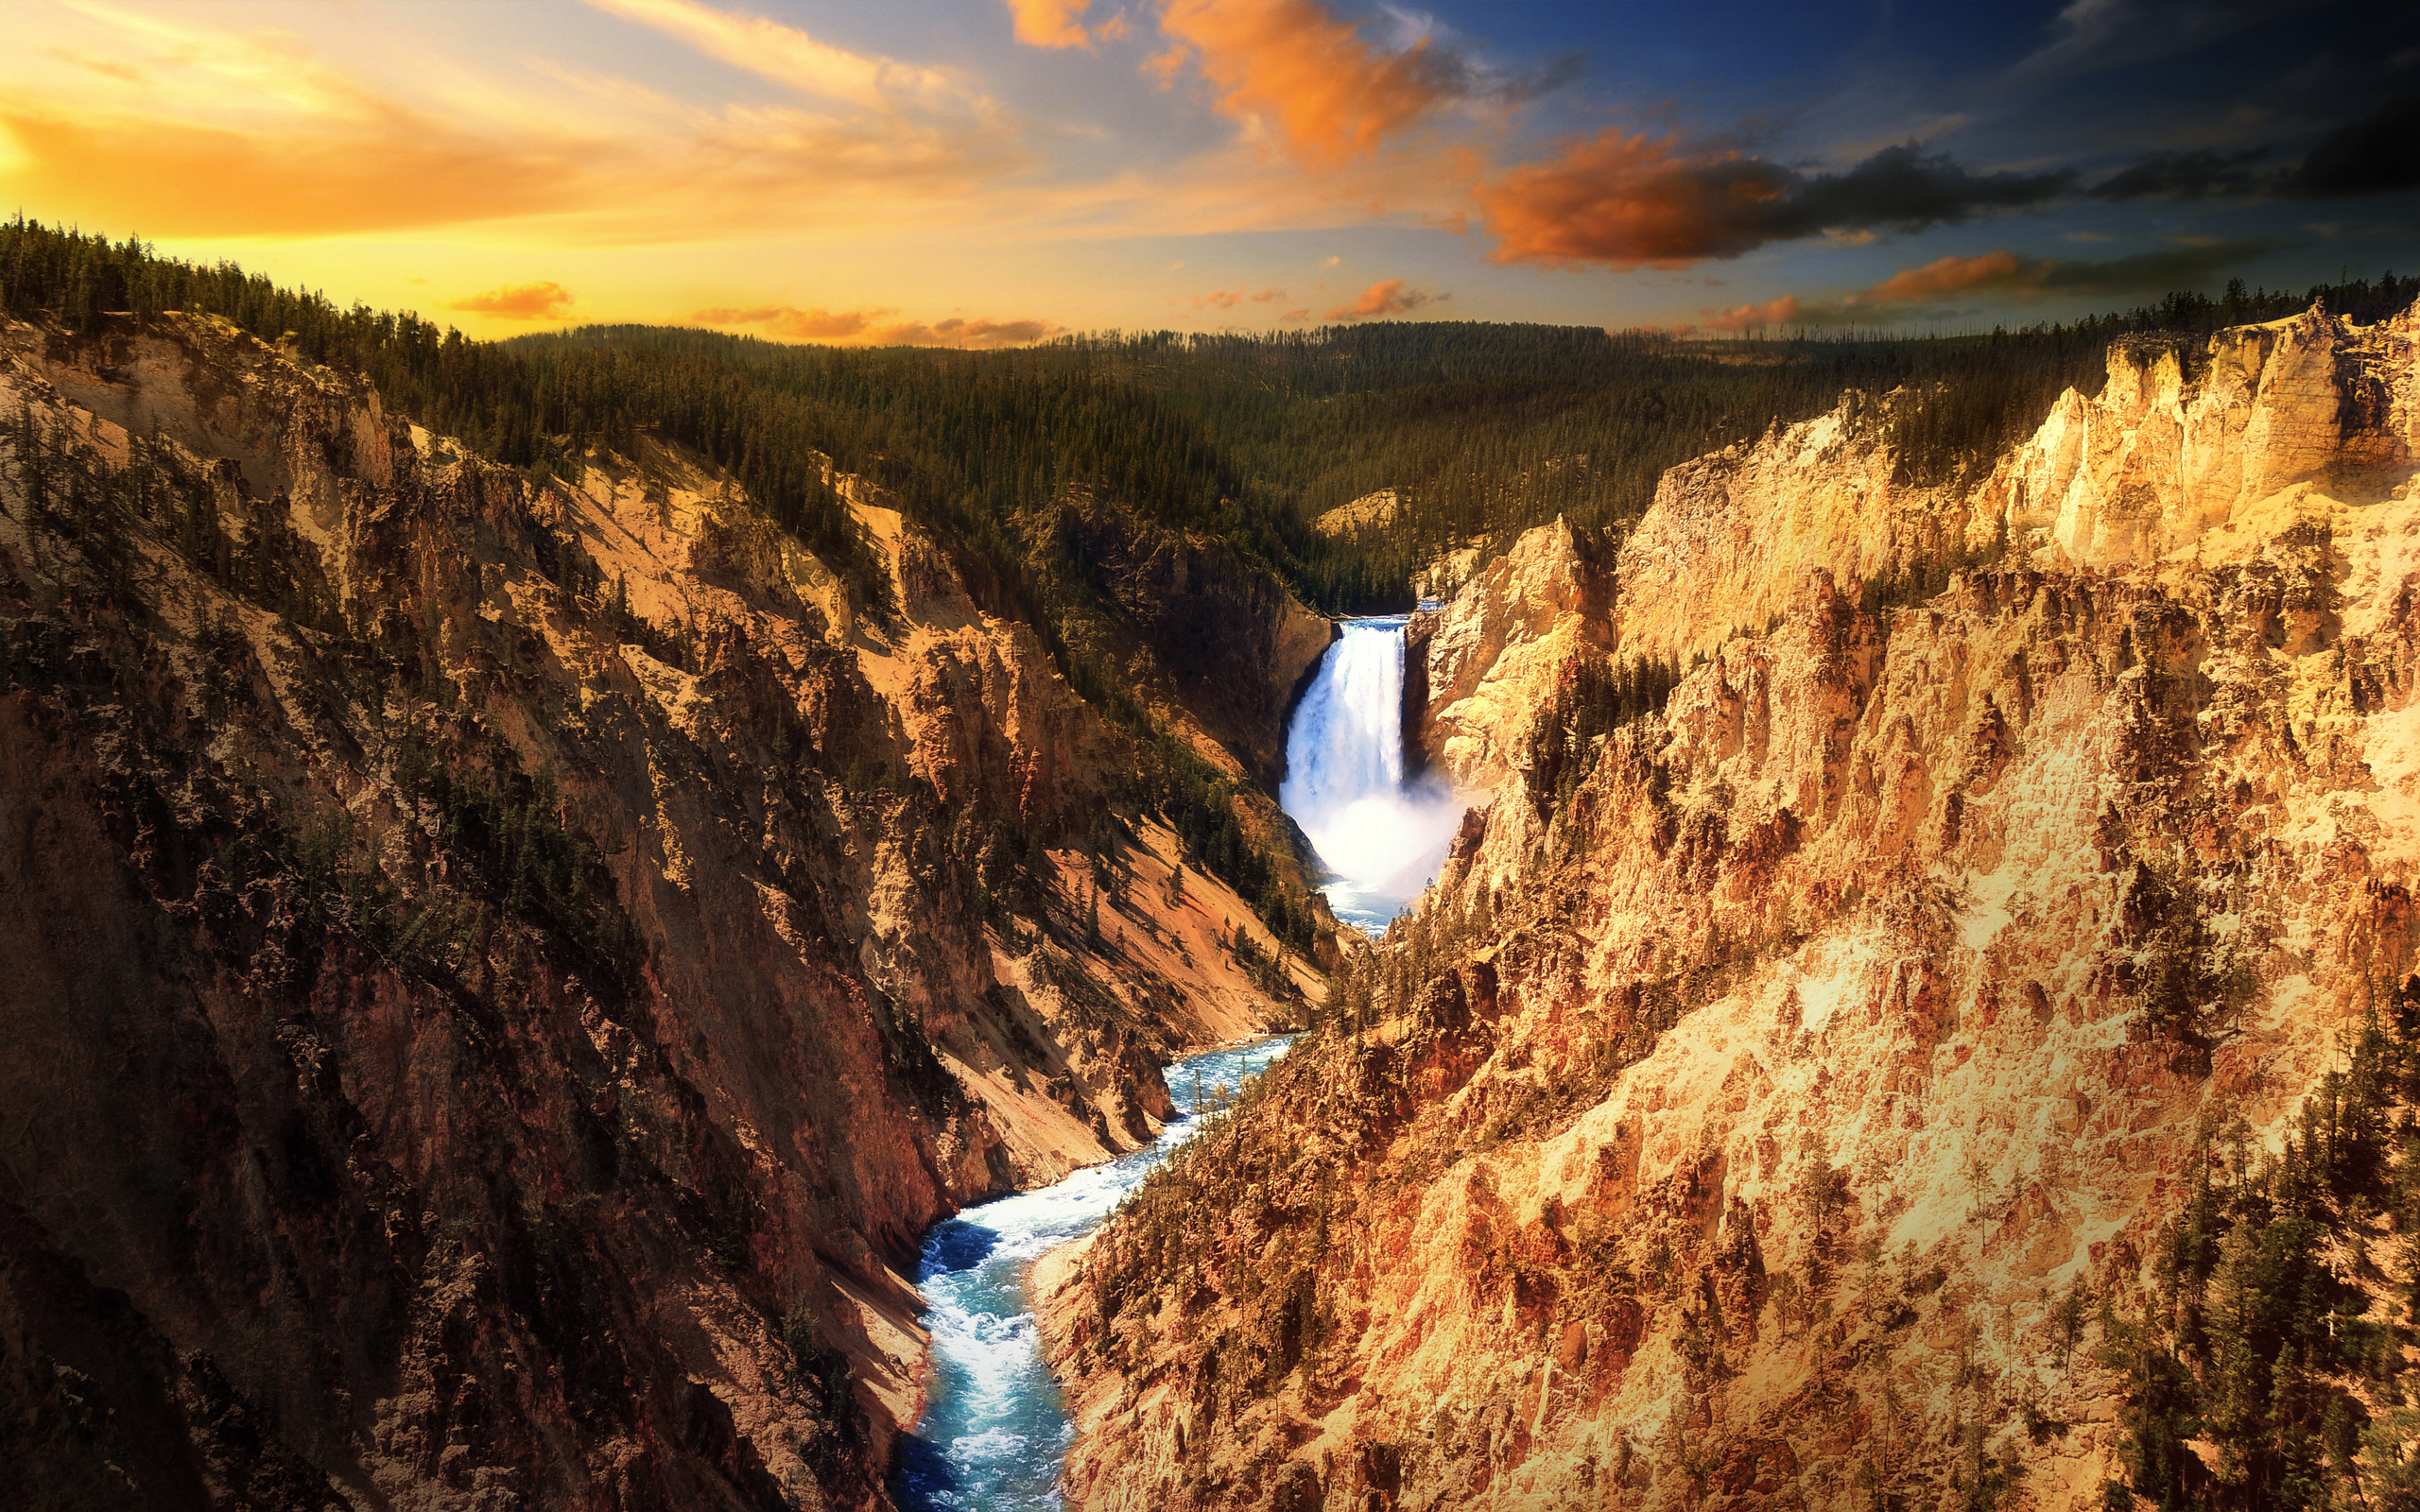 14 Yellowstone National Park HD Wallpapers Background Images